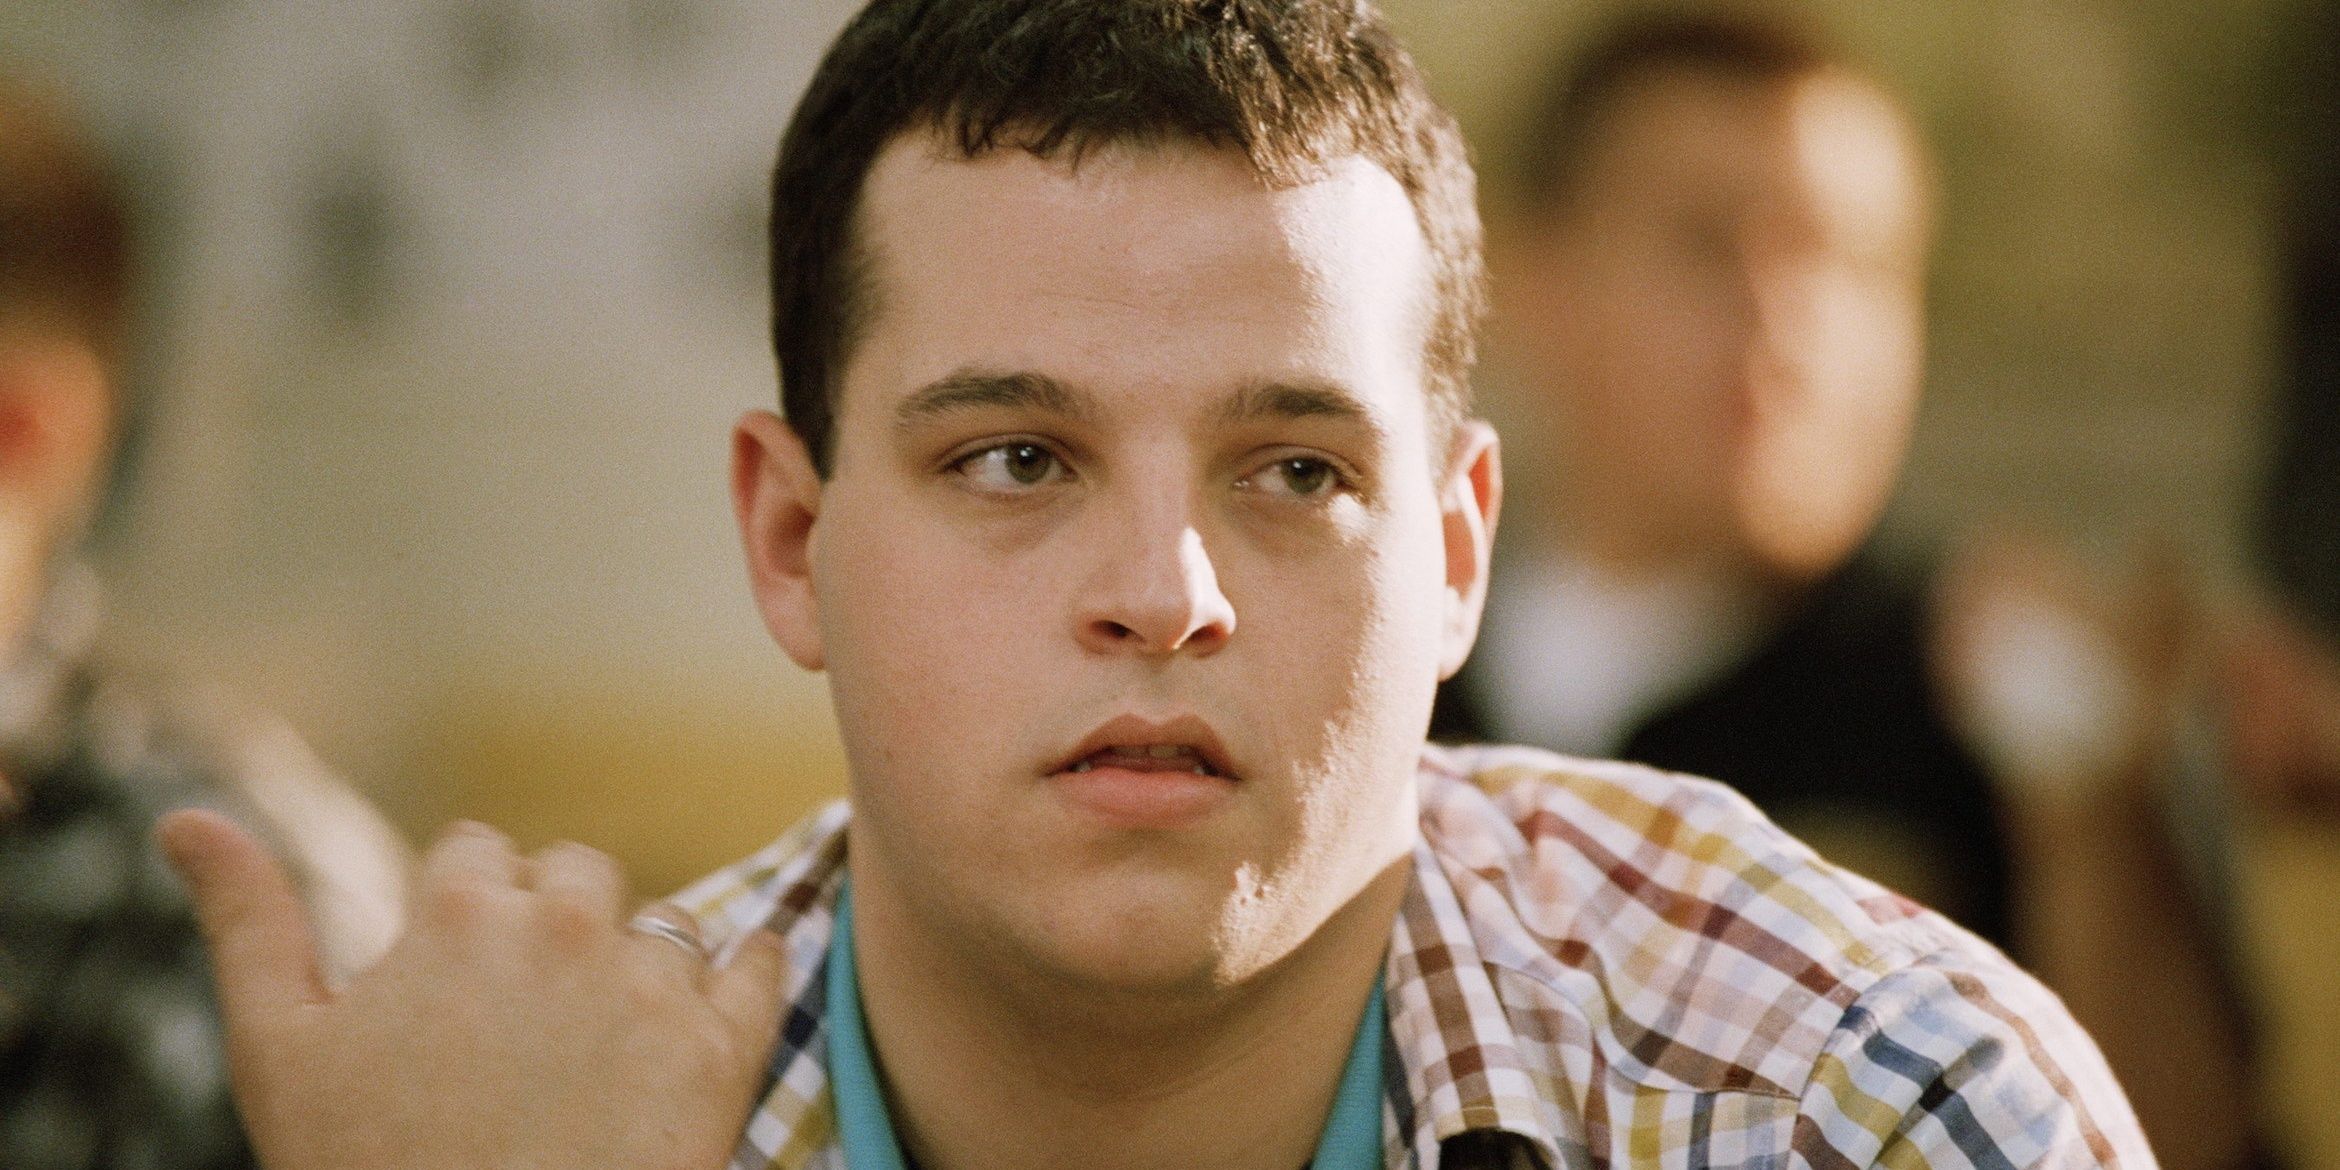 Damian Leigh in his classroom in Mean Girls Cropped